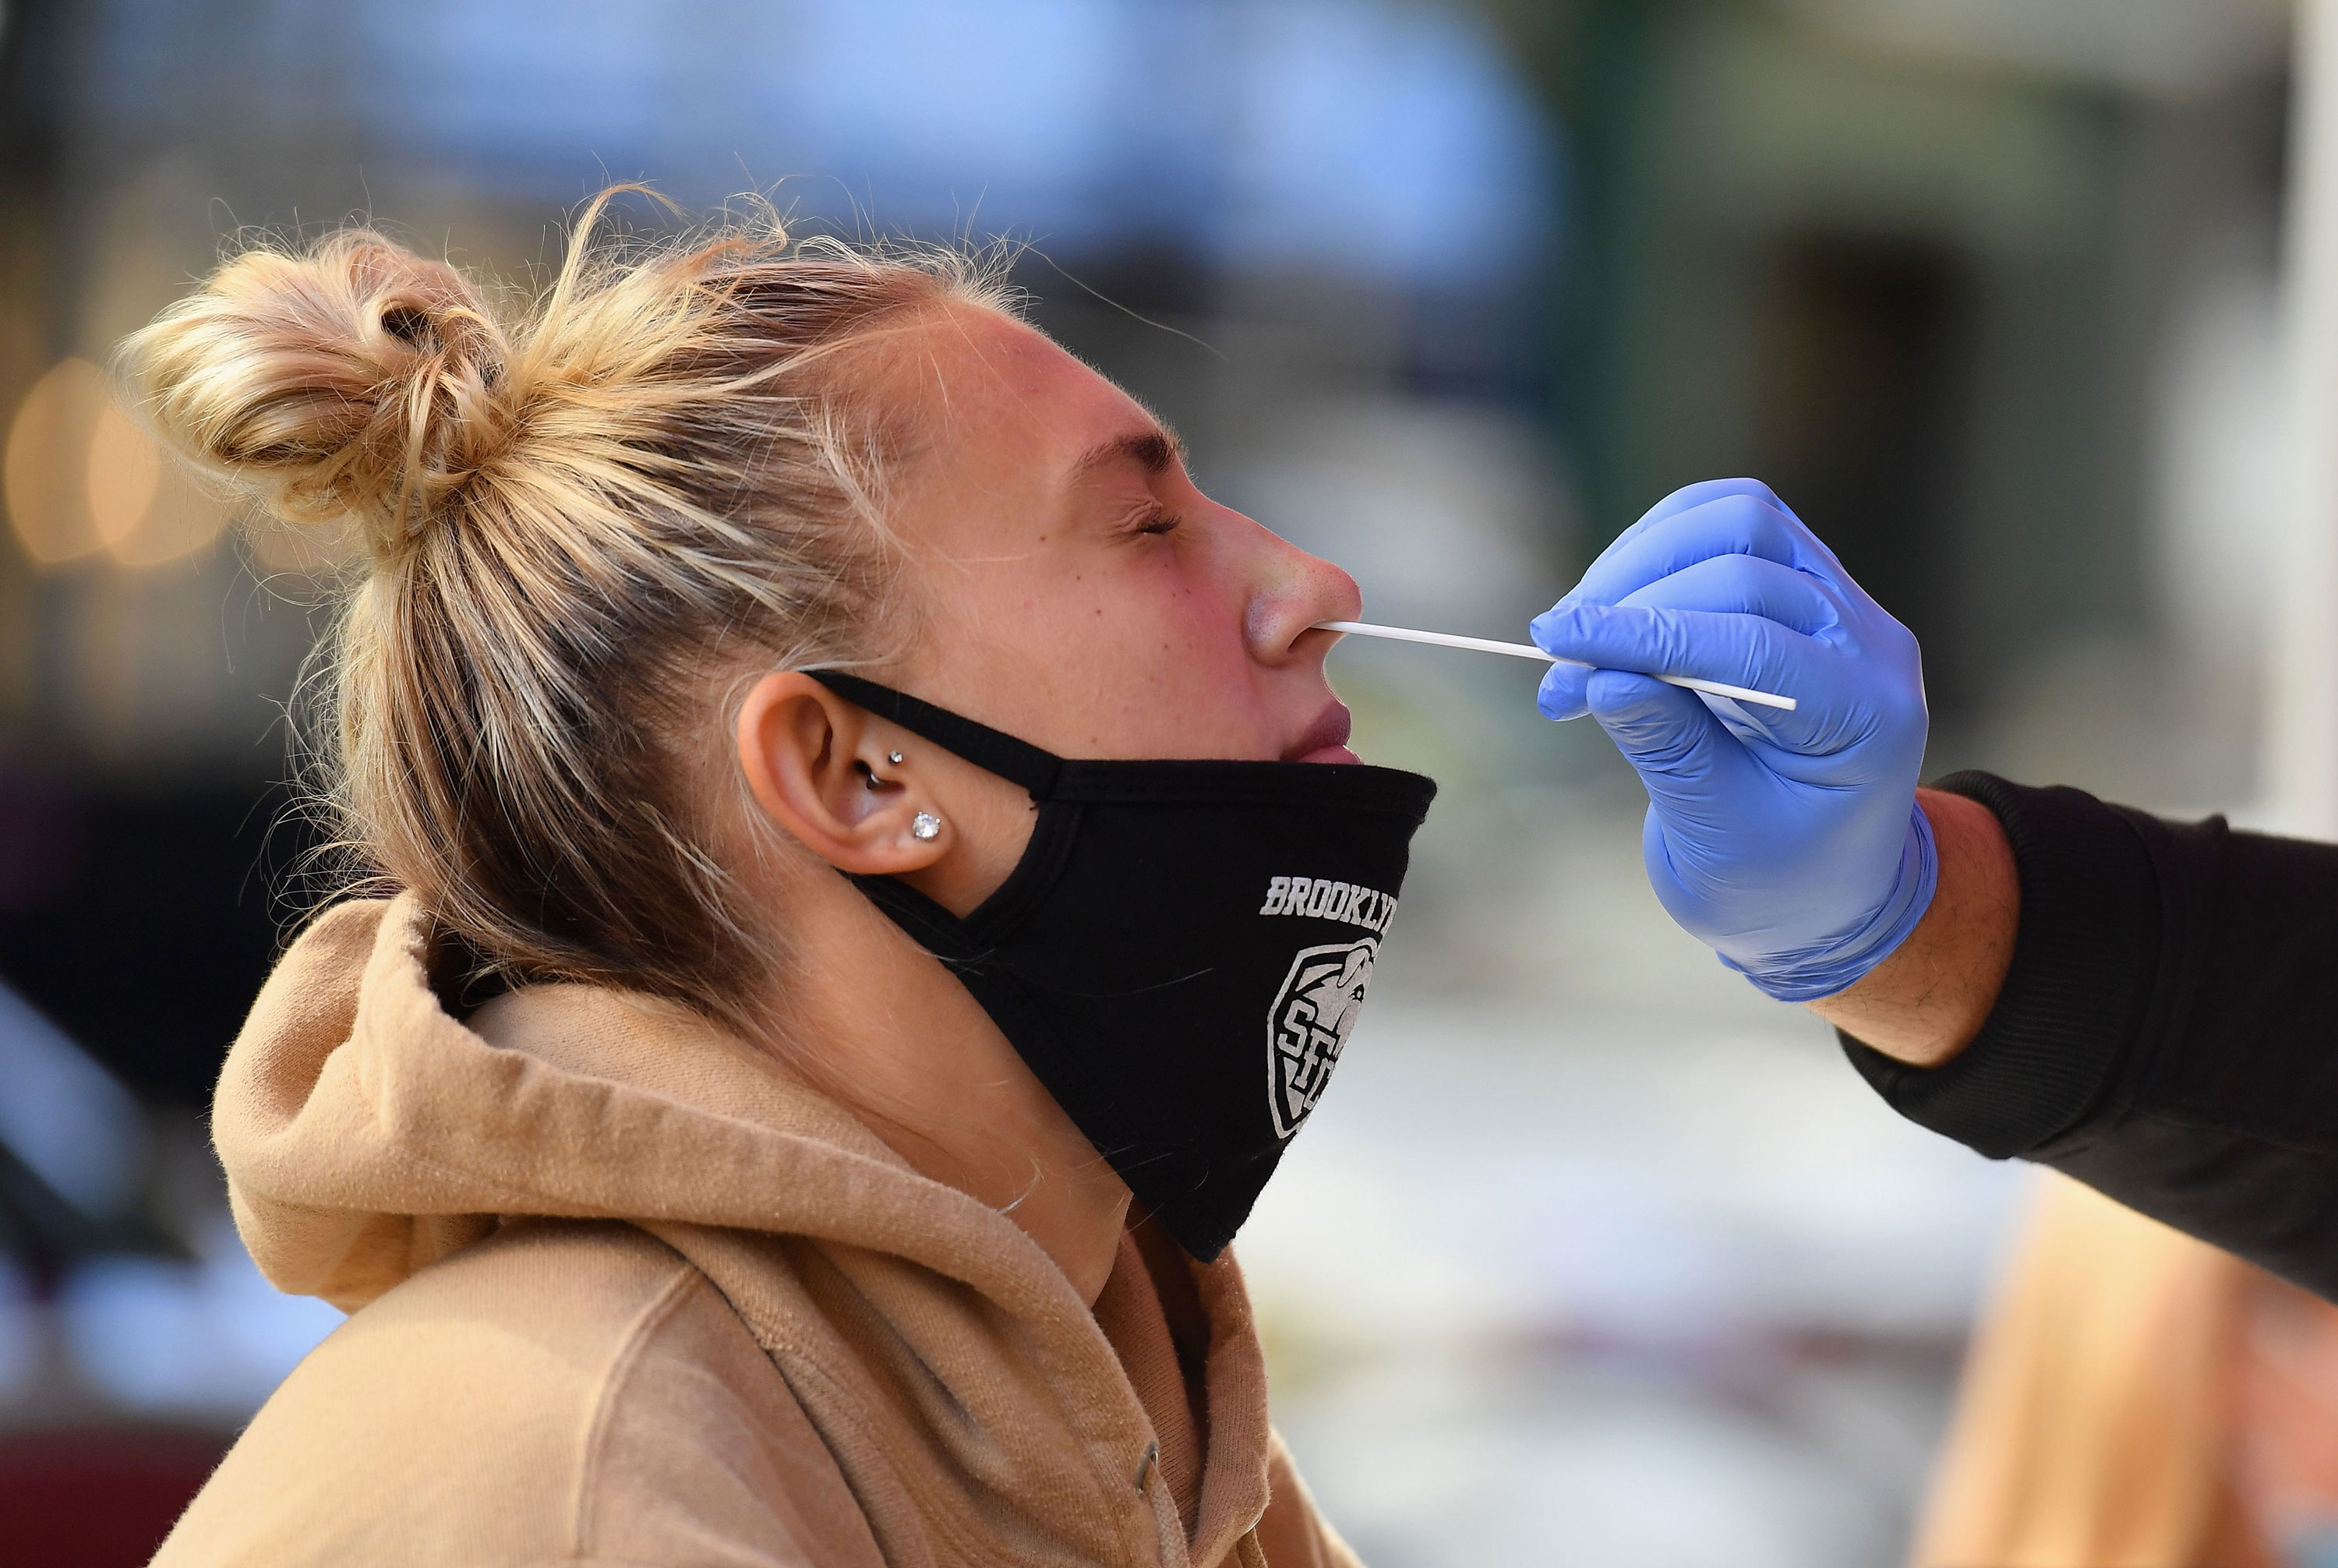 A medical worker takes a nasal swab sample from a student to test for Covid-19 at a pop up testing site in New York on October 8.